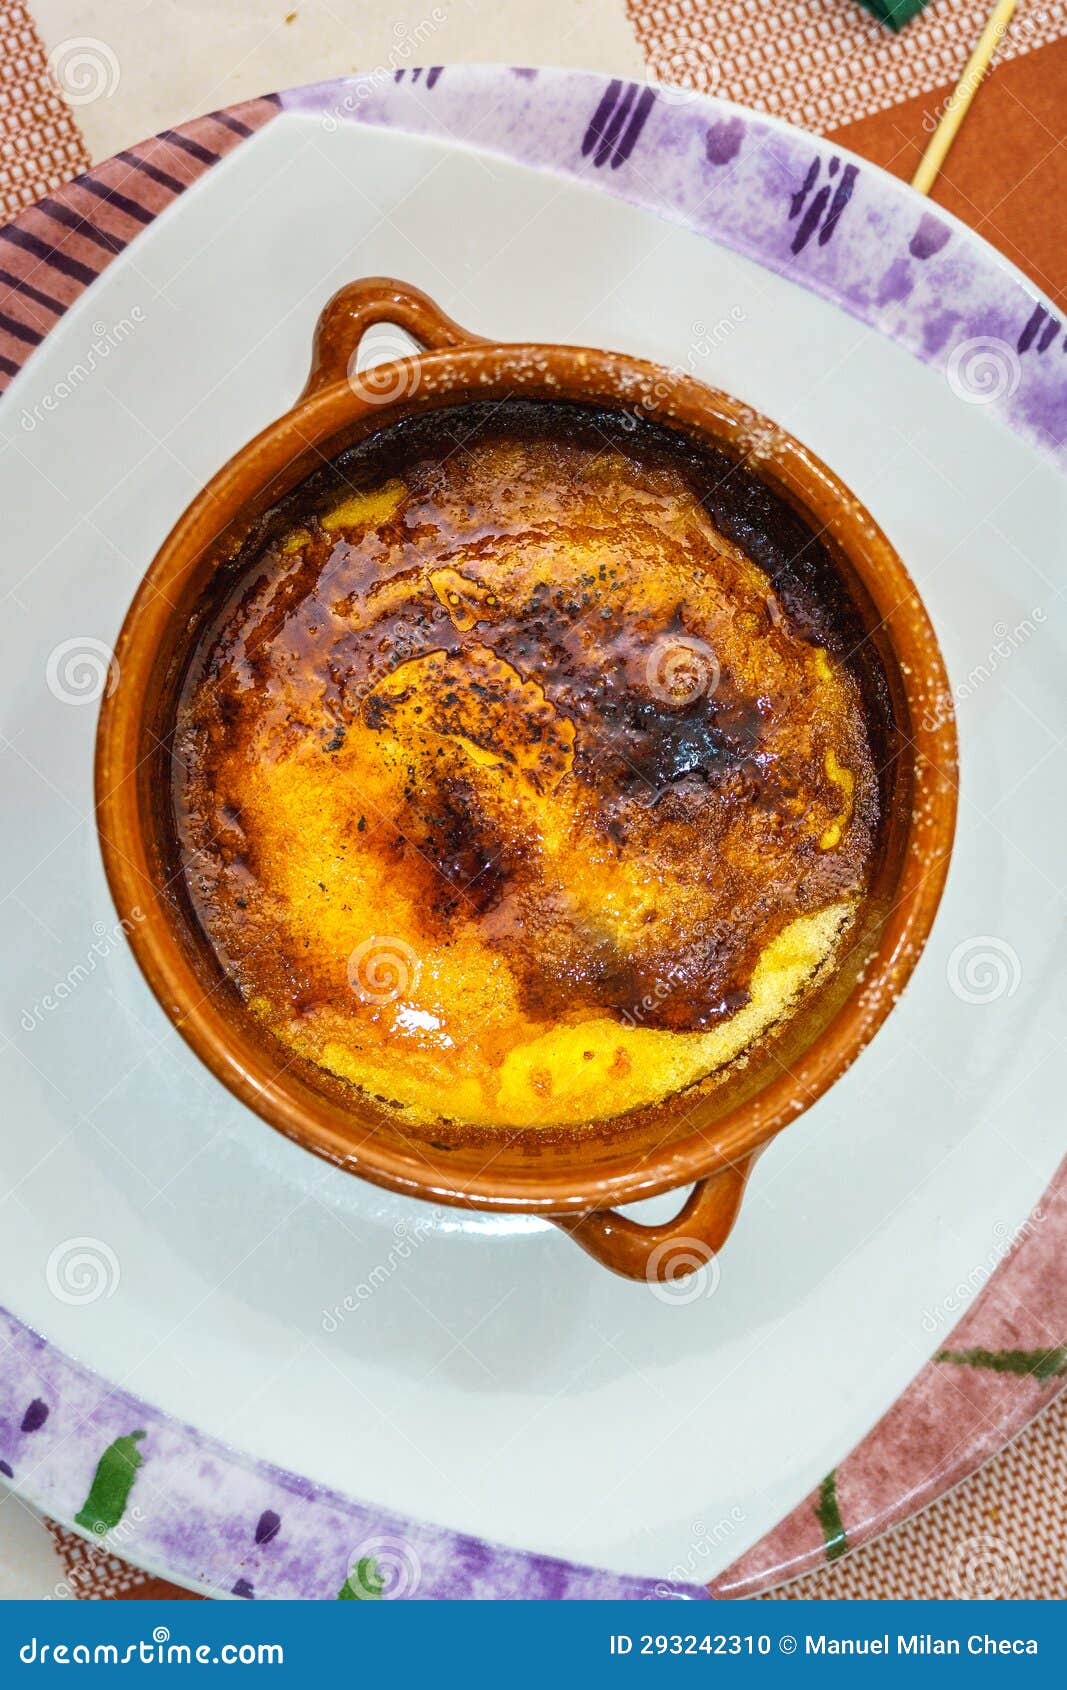 crema catalana, typical dessert from catalonia, spain. it is the best known catalan dessert, made with a base of milk, eggs and